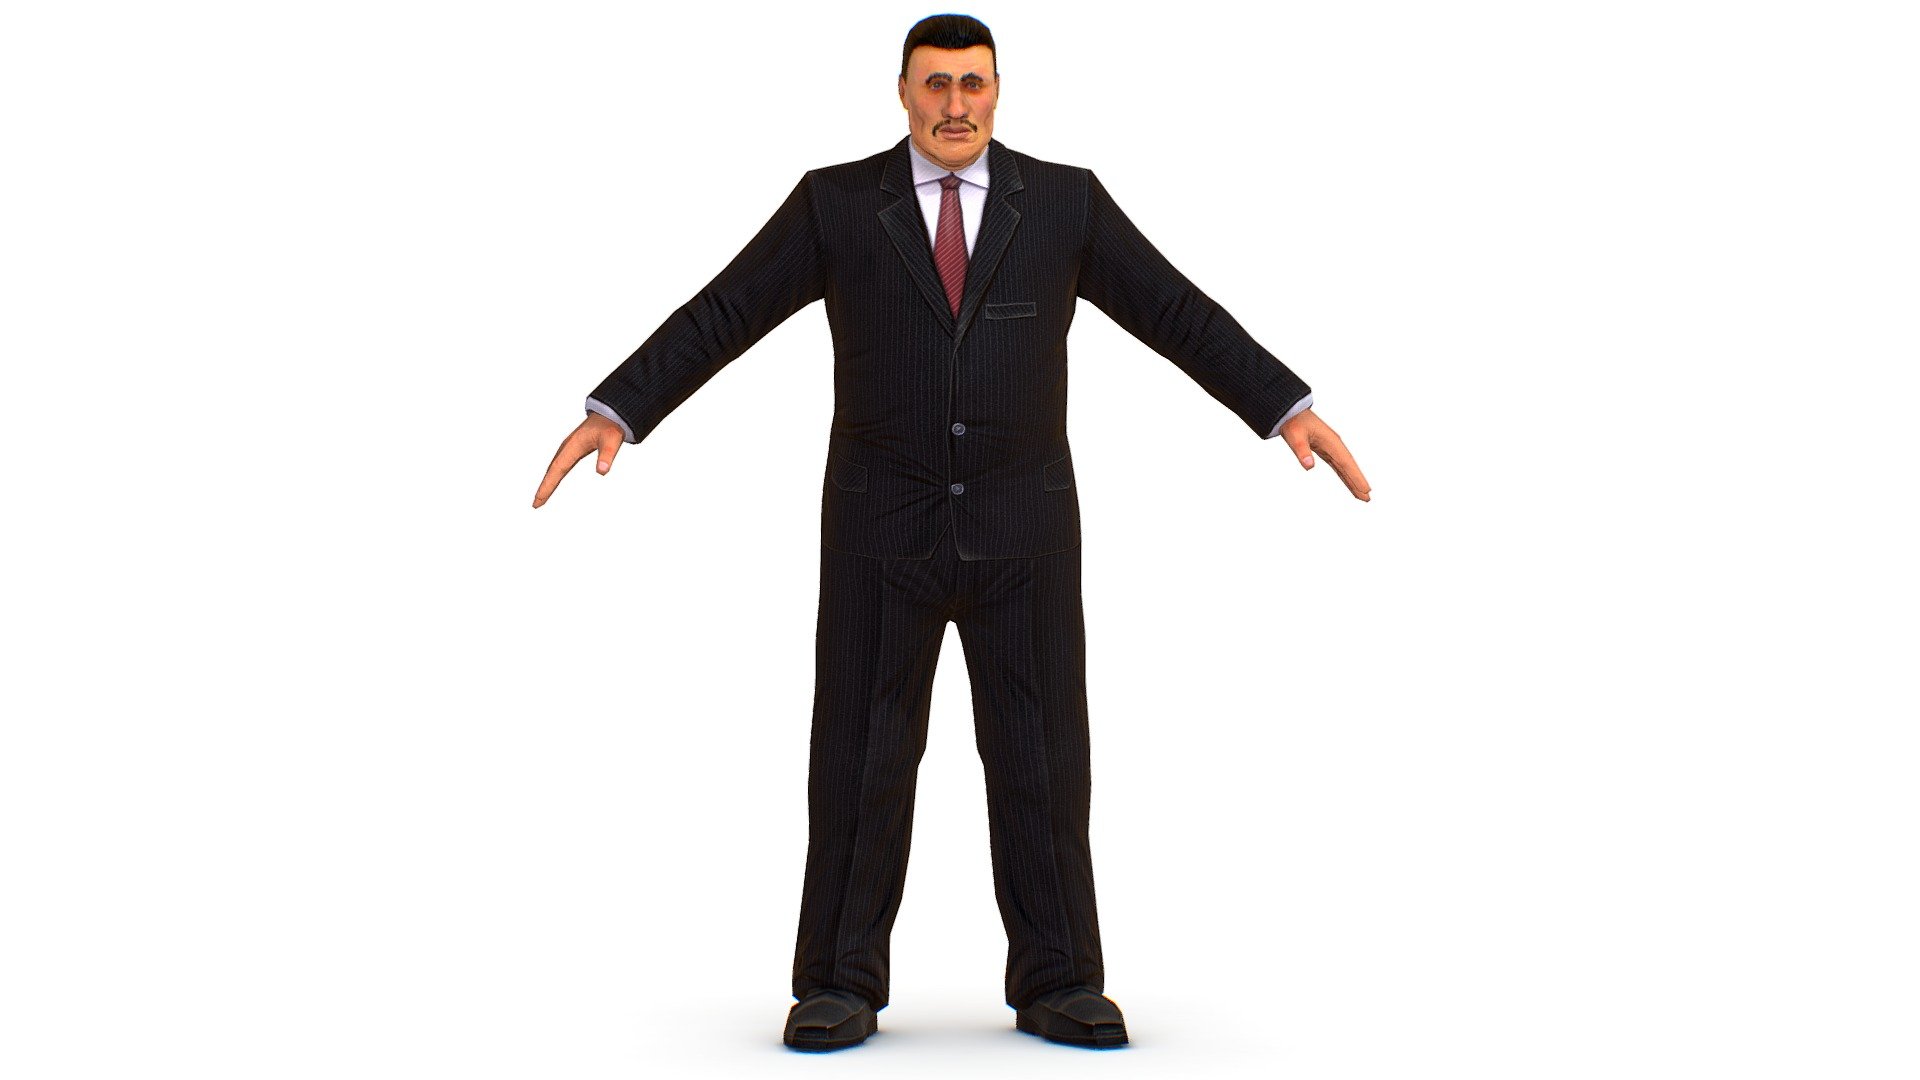 High quality LOW POLY 3d model for your game,render image or video.
textures size: 2x1024x1024 color,normal,specular (body,head)
3dsMax and Maya file included
 - LowPoly Man Body Boss Jacket Suit - Buy Royalty Free 3D model by Oleg Shuldiakov (@olegshuldiakov) 3d model